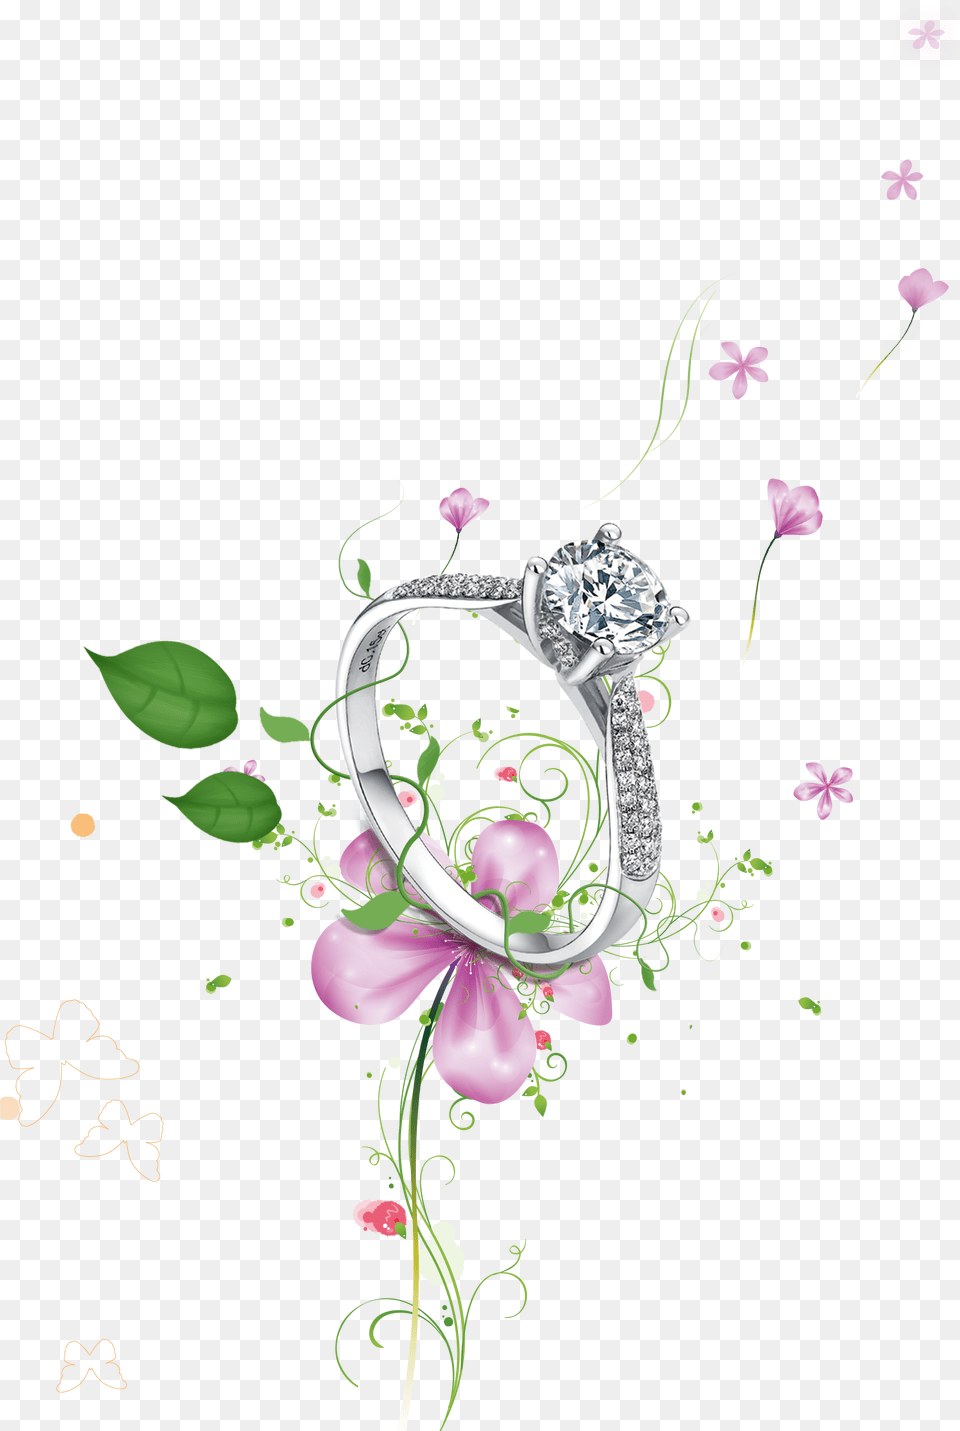 Diamond Love In Wedding Falling Ring Clipart Wedding Flower Falling, Accessories, Jewelry, Gemstone, Floral Design Png Image